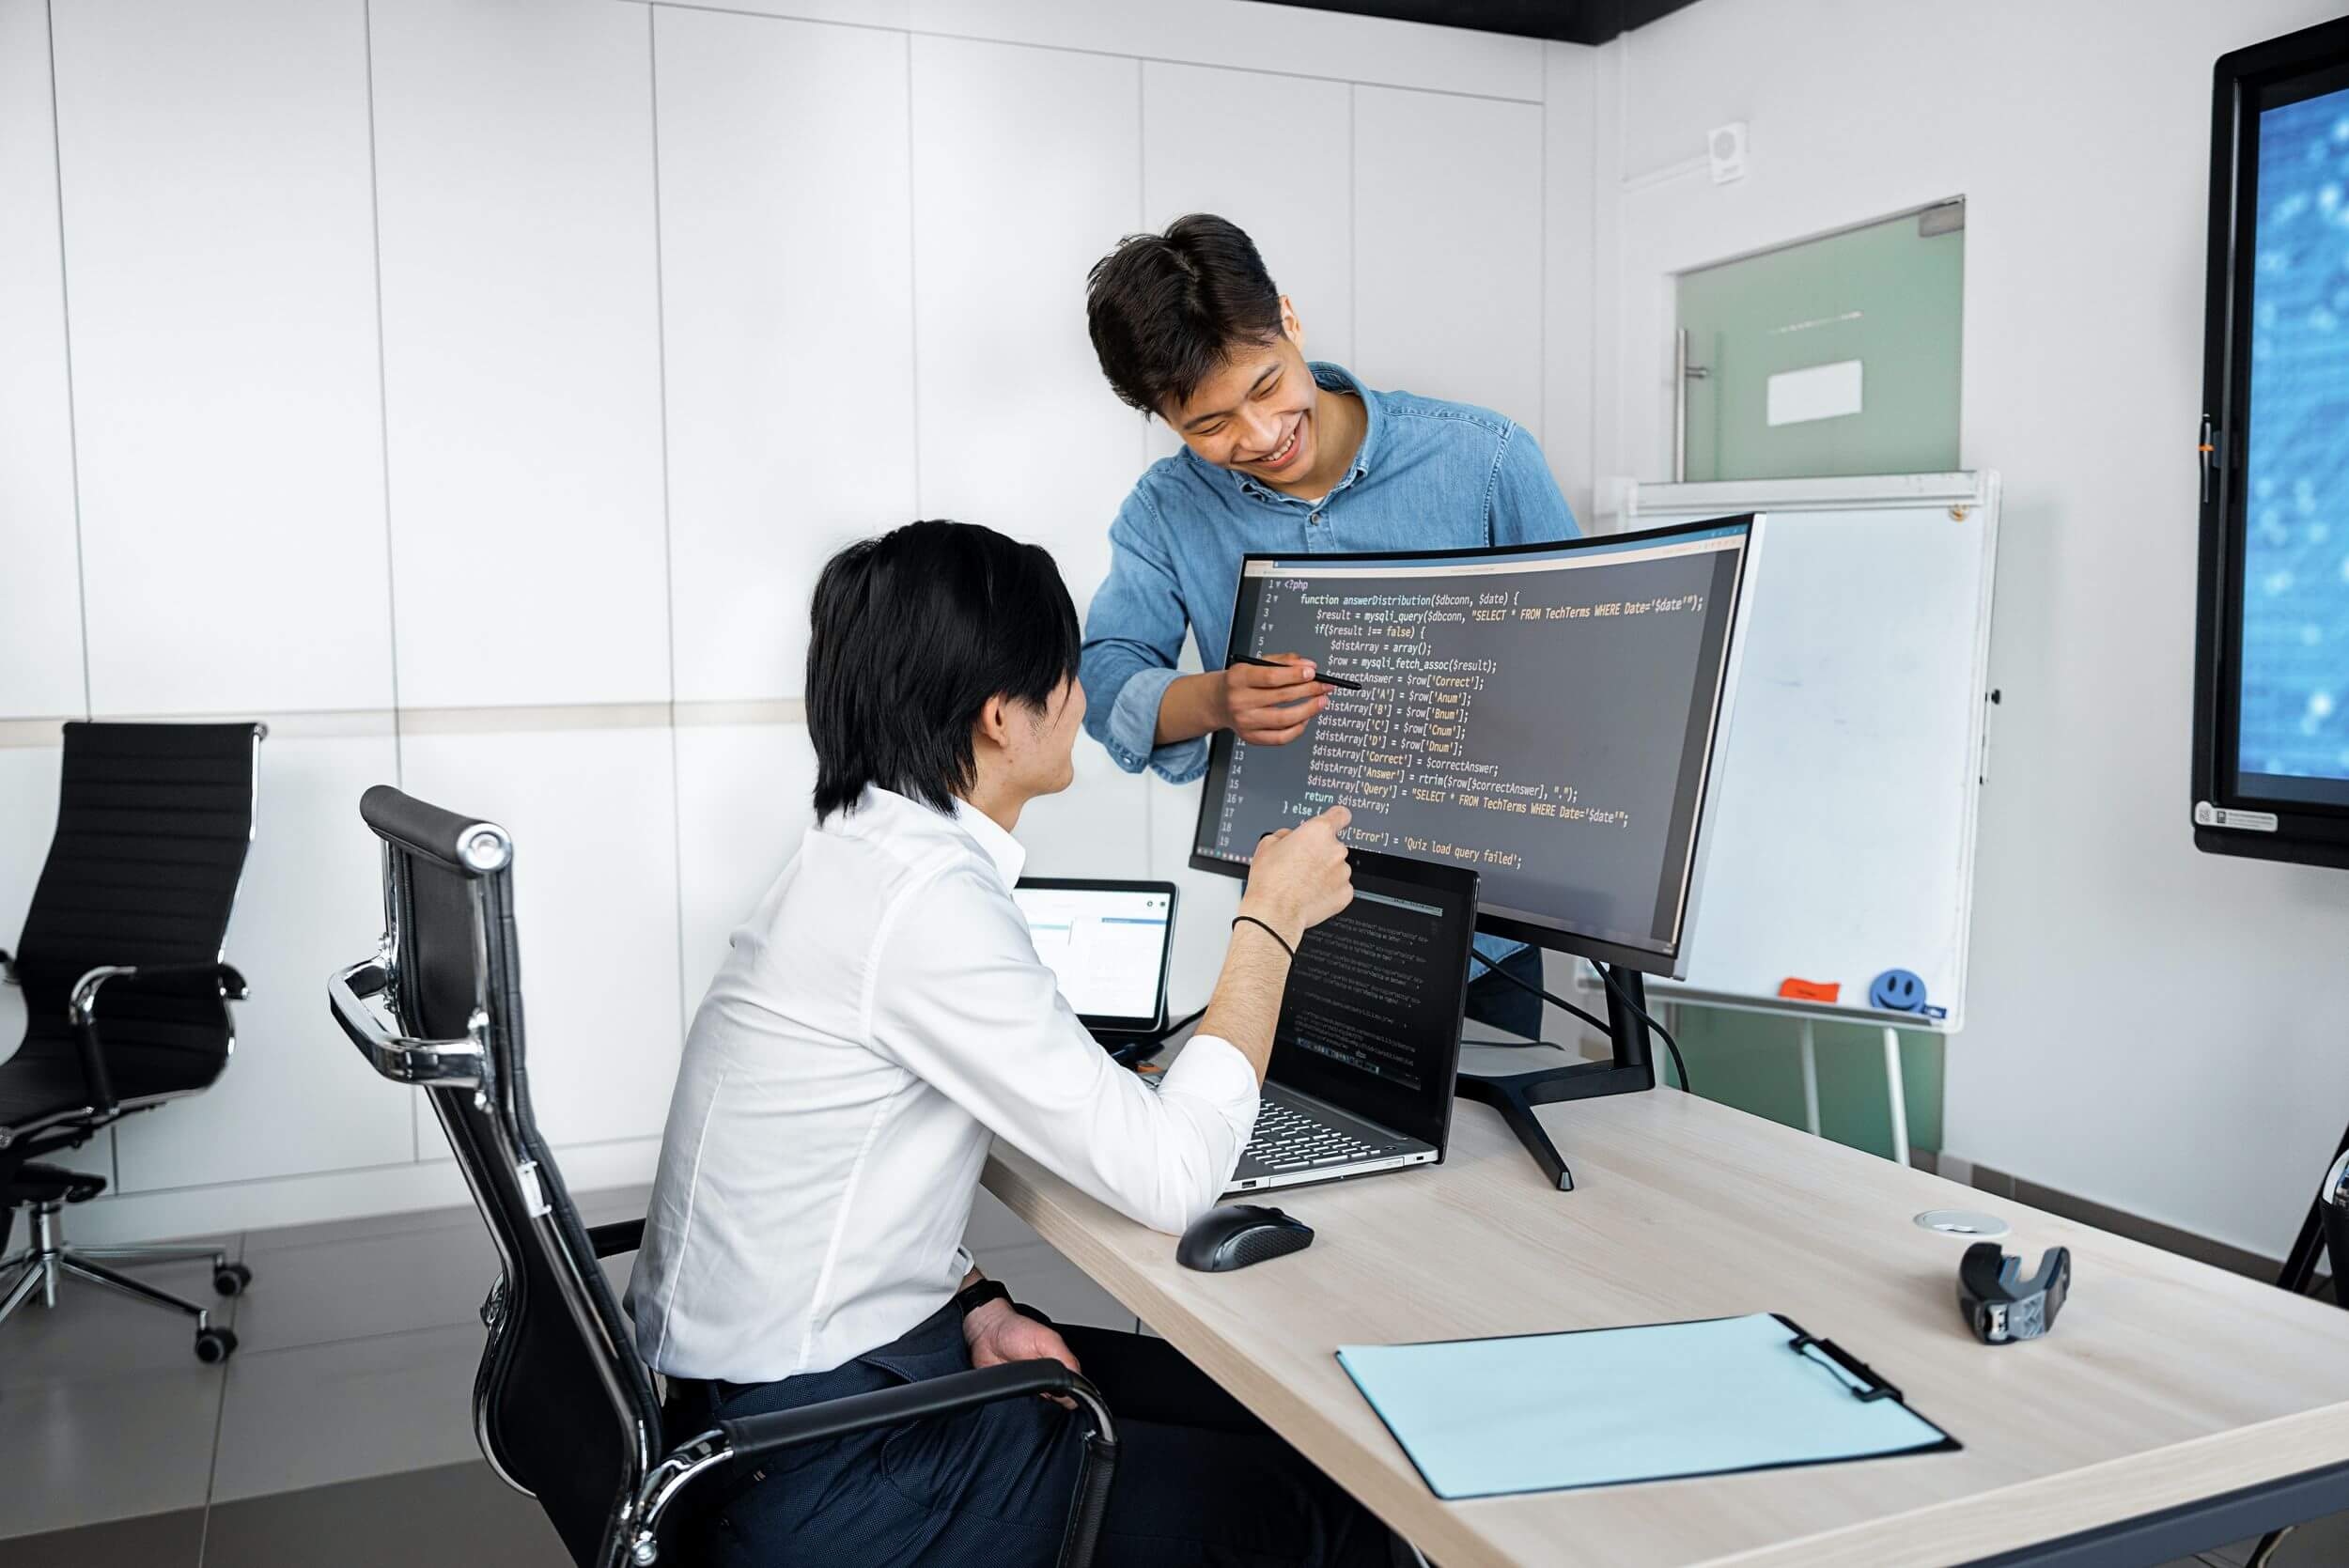 Two people evaluate code on computer monitor.